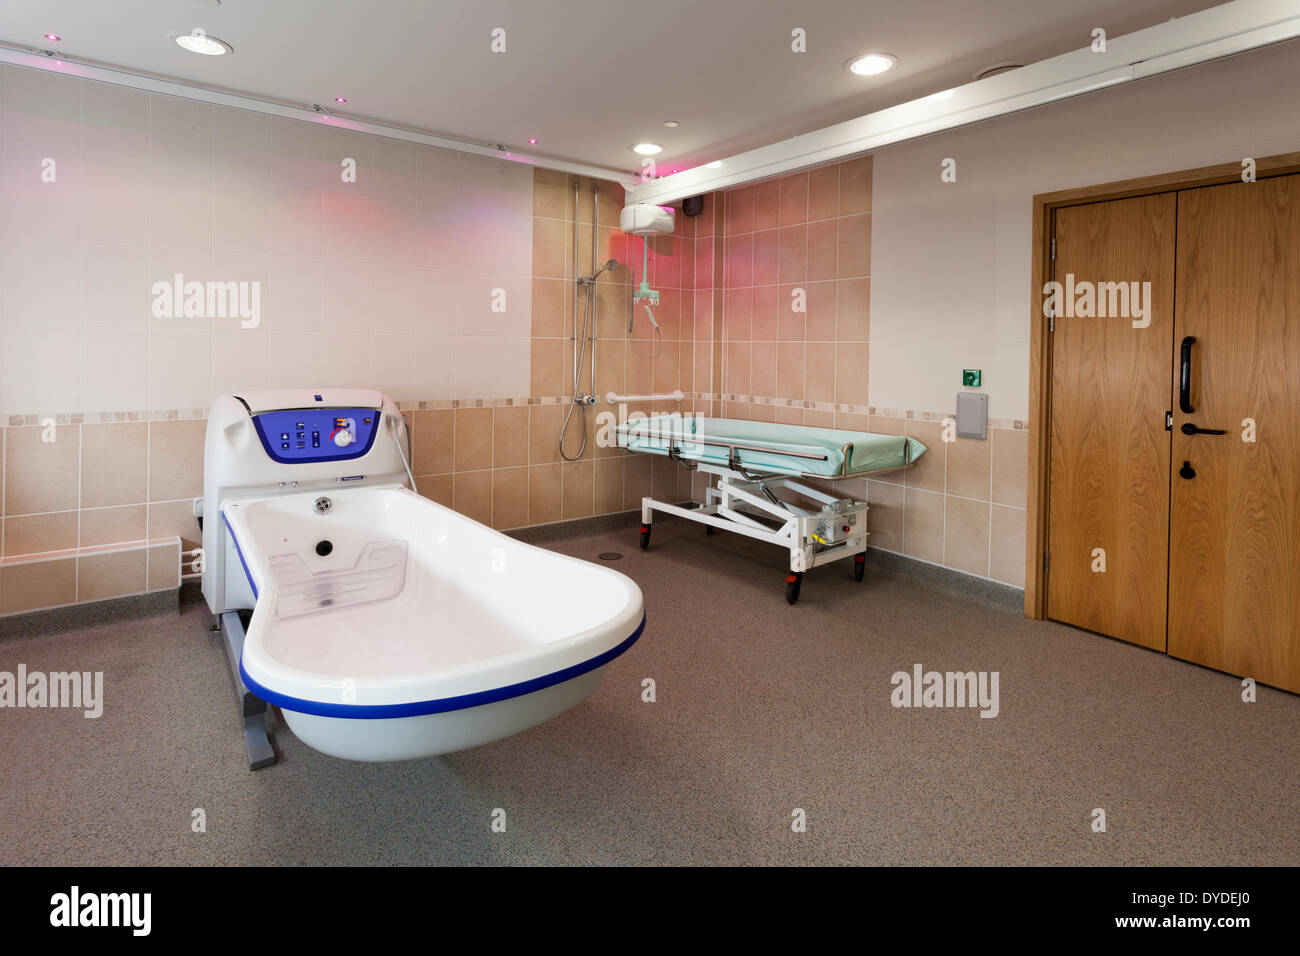 Care home assisted bathroom with ceiling track hoist lifting gear and sensory lights. Stock Photo